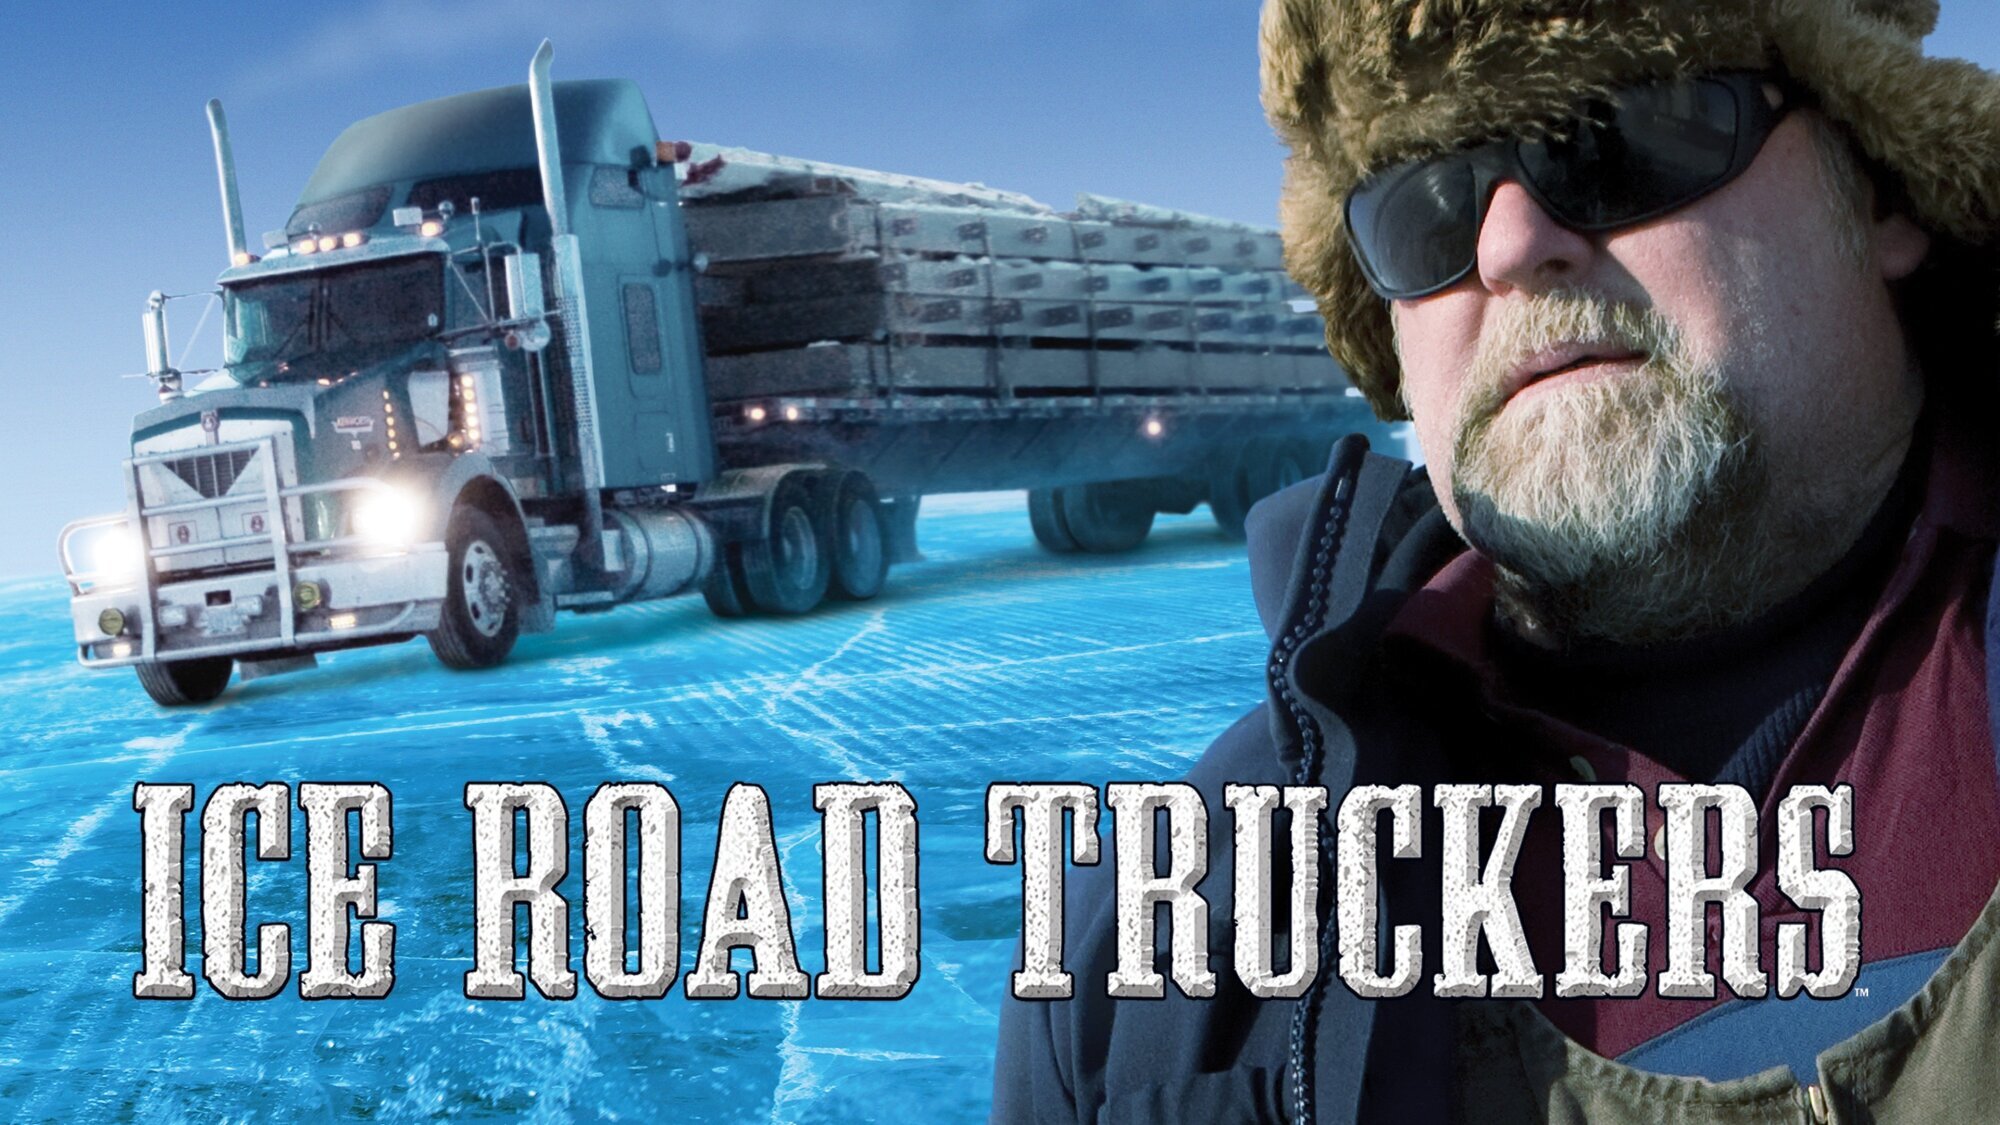 Poster IceRoadTruckers_177744996.png